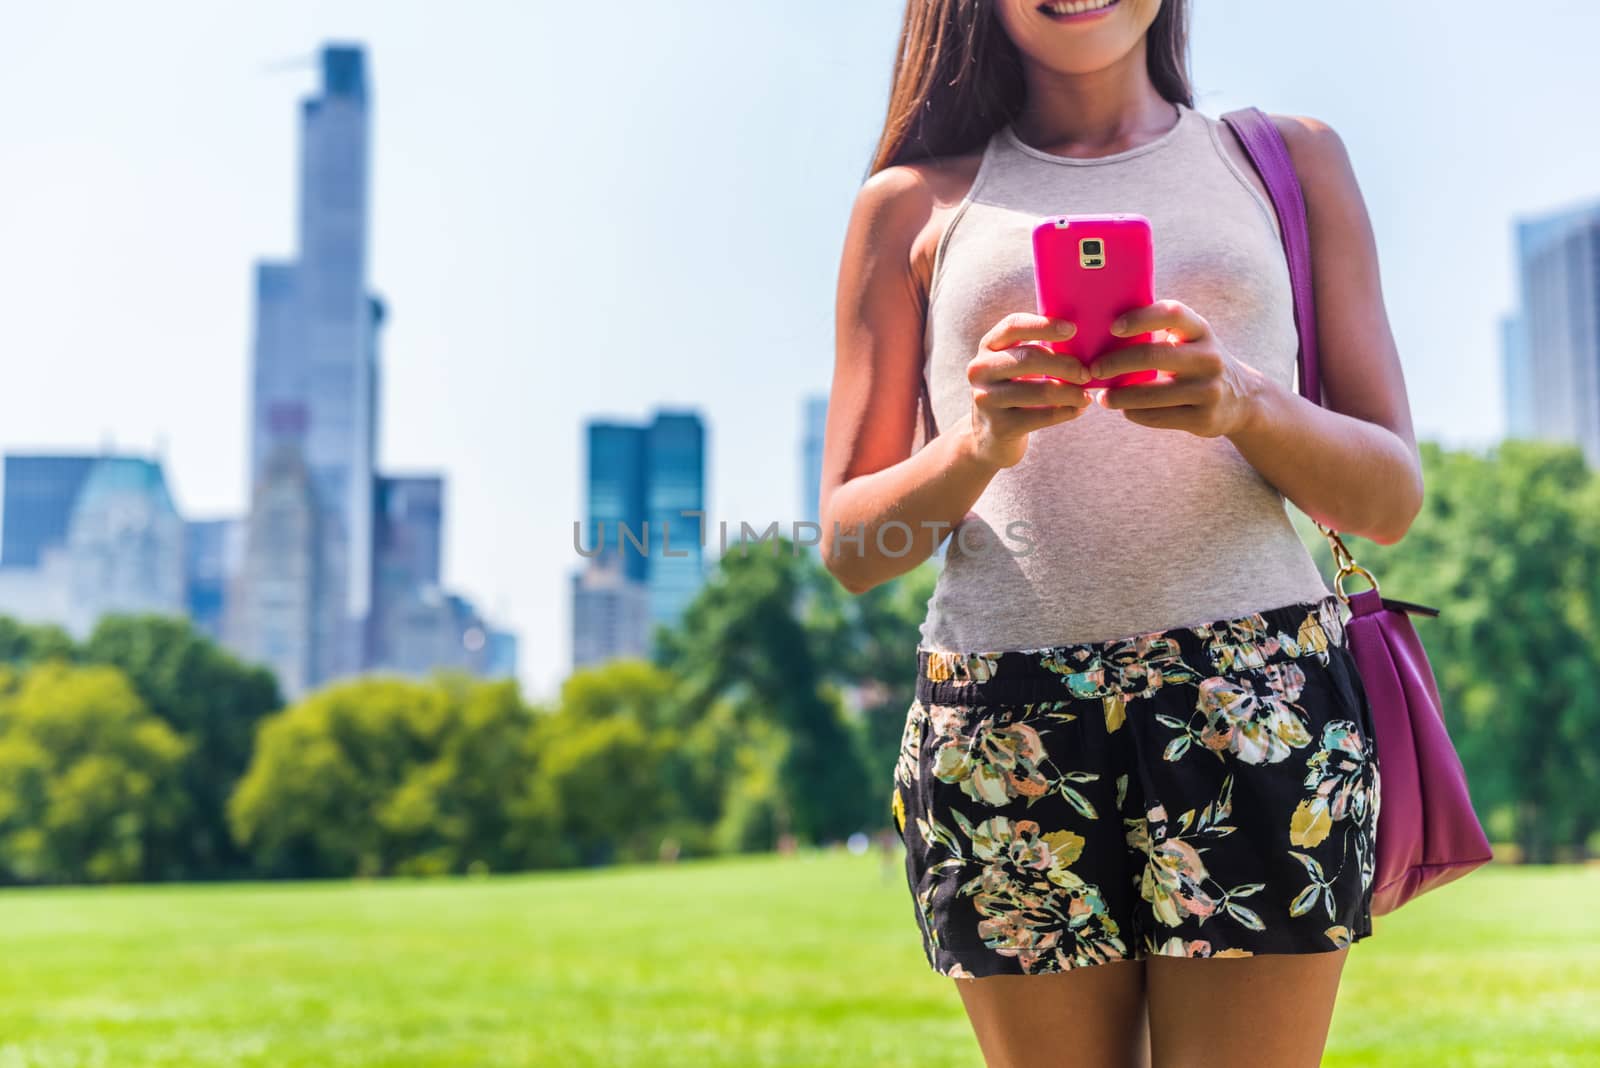 Urban modern NYC city lifestyle smartphone woman. Person texting sms on mobile phone in Central park Meadow, New York. Summer vacation travel by Maridav